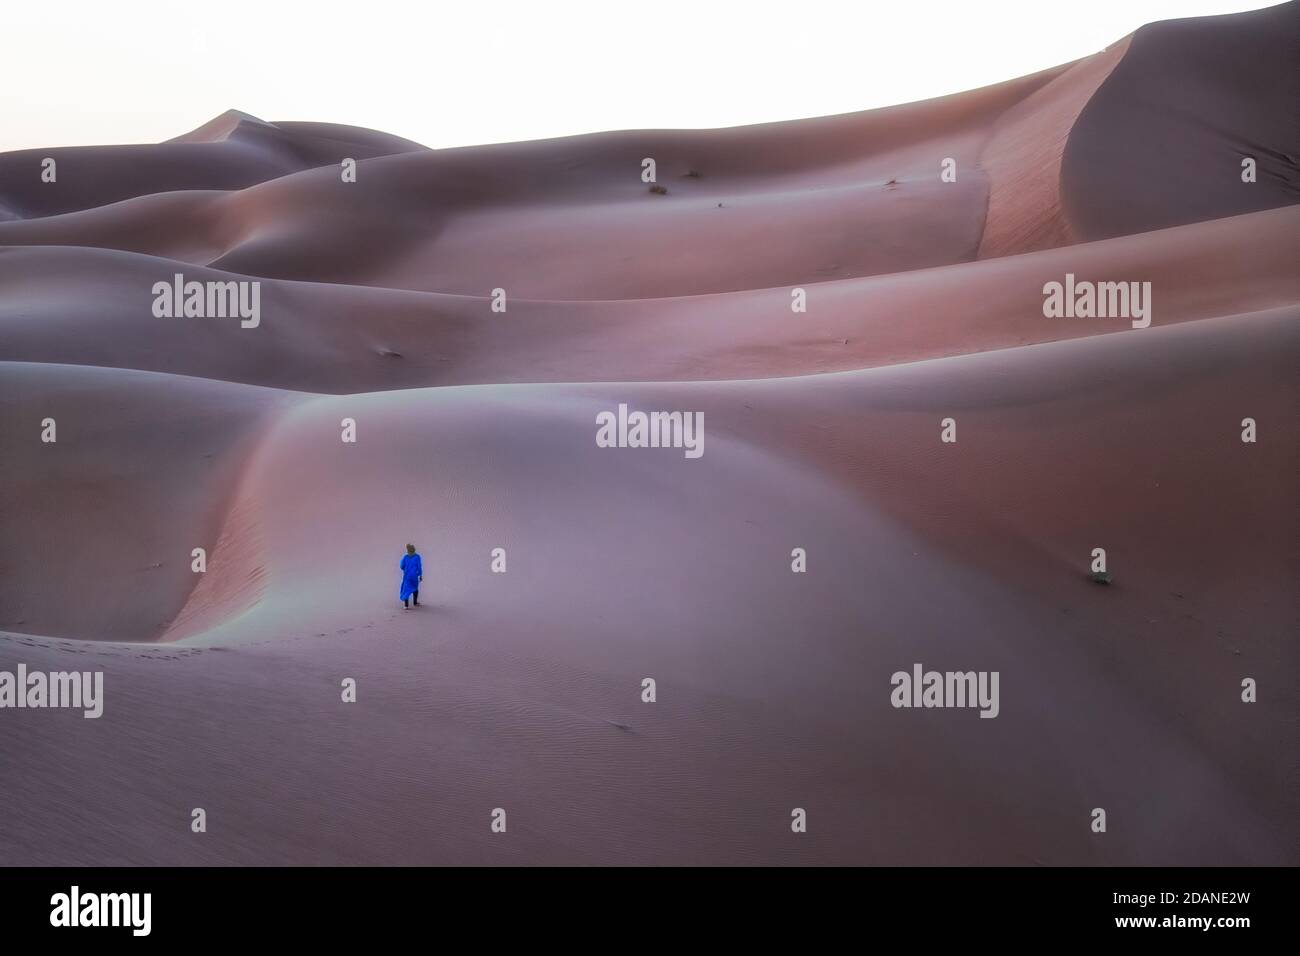 Unrecognizable Berber man walking on a dreamy desert at Twilight of dawn. Desert dune of Erg Chigaga, at the gates of the Sahara. Morocco. Concept of Stock Photo